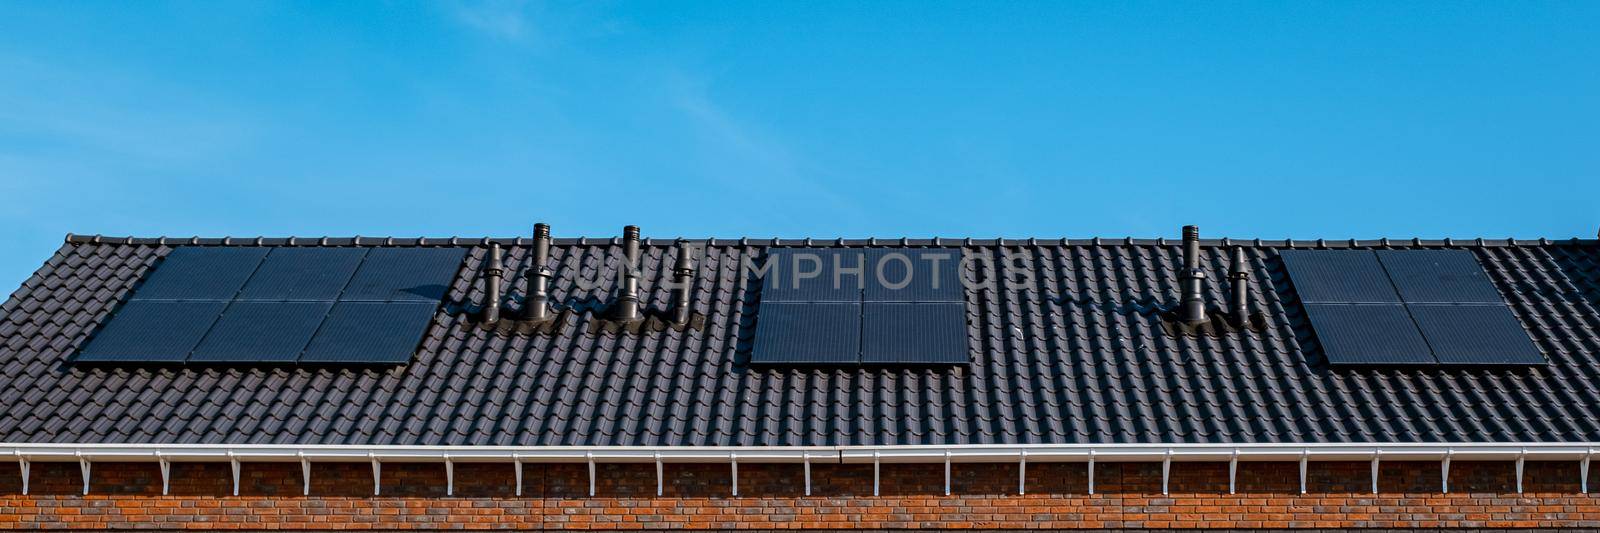 Newly build houses with solar panels attached on the roof against a sunny sky Close up of a new building with black solar panels. Zonnepanelen, Zonne energie, Translation: Solar panel, , Sun Energy.